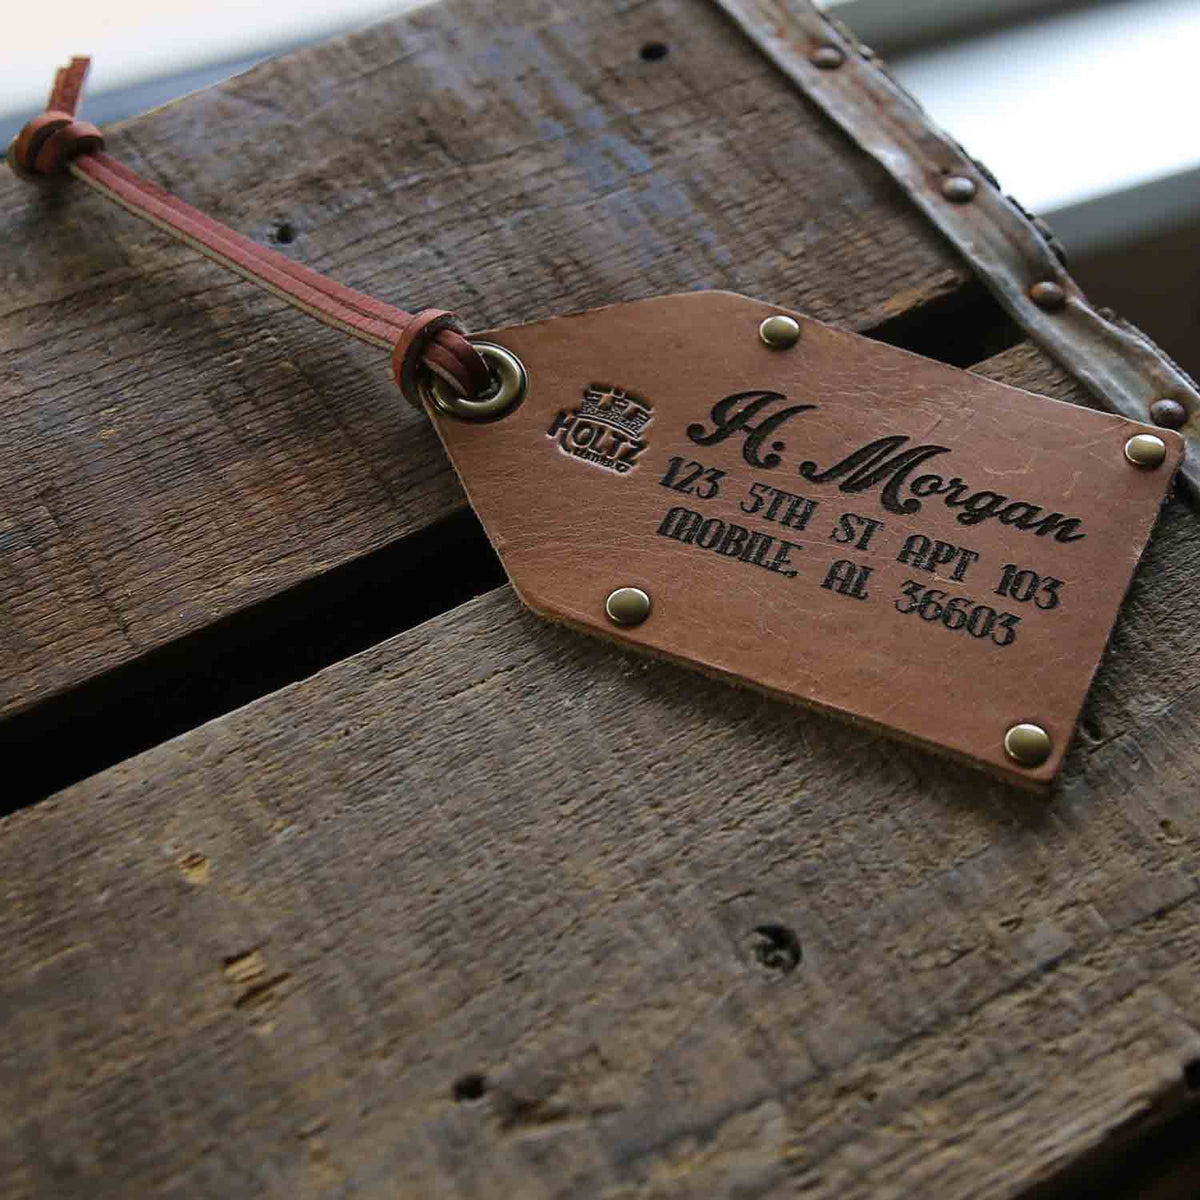 The Traveler Fine Leather Luggage Tag